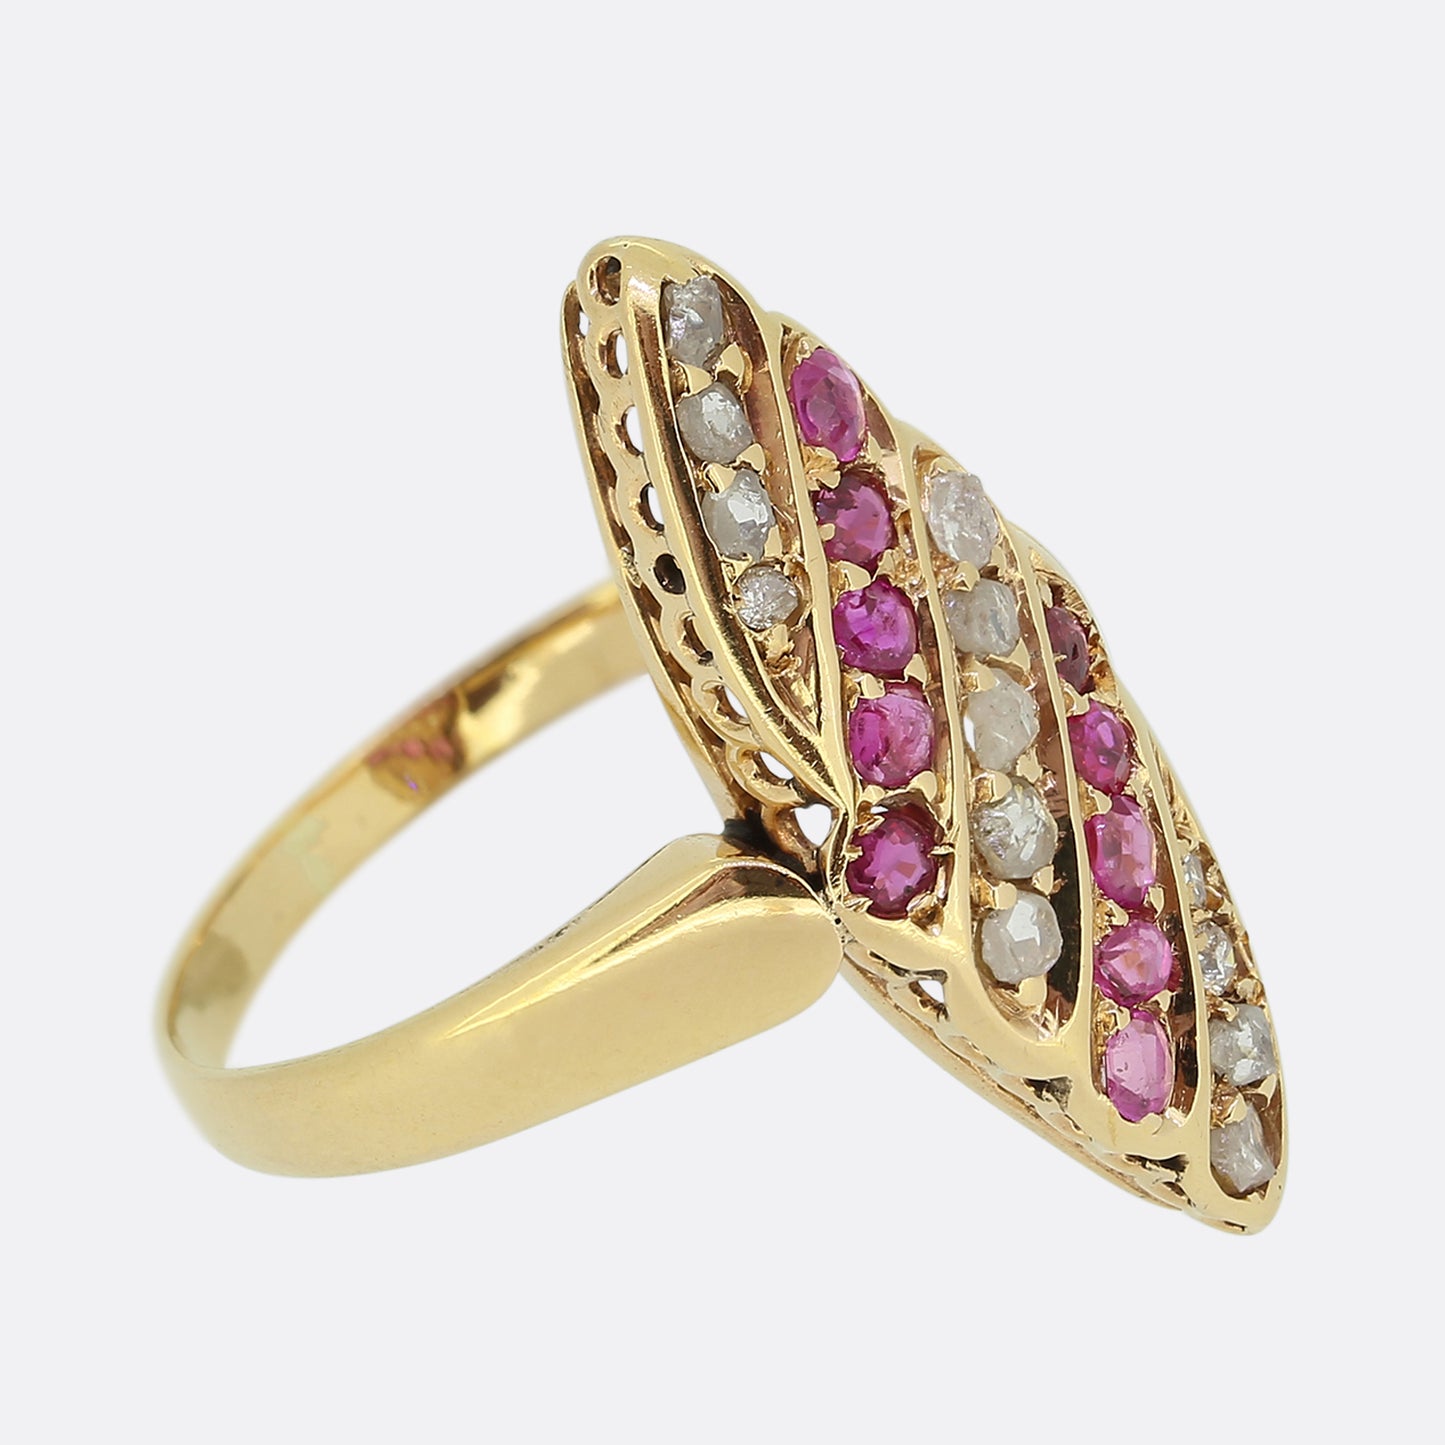 Victorian Ruby and Diamond Navette Ring